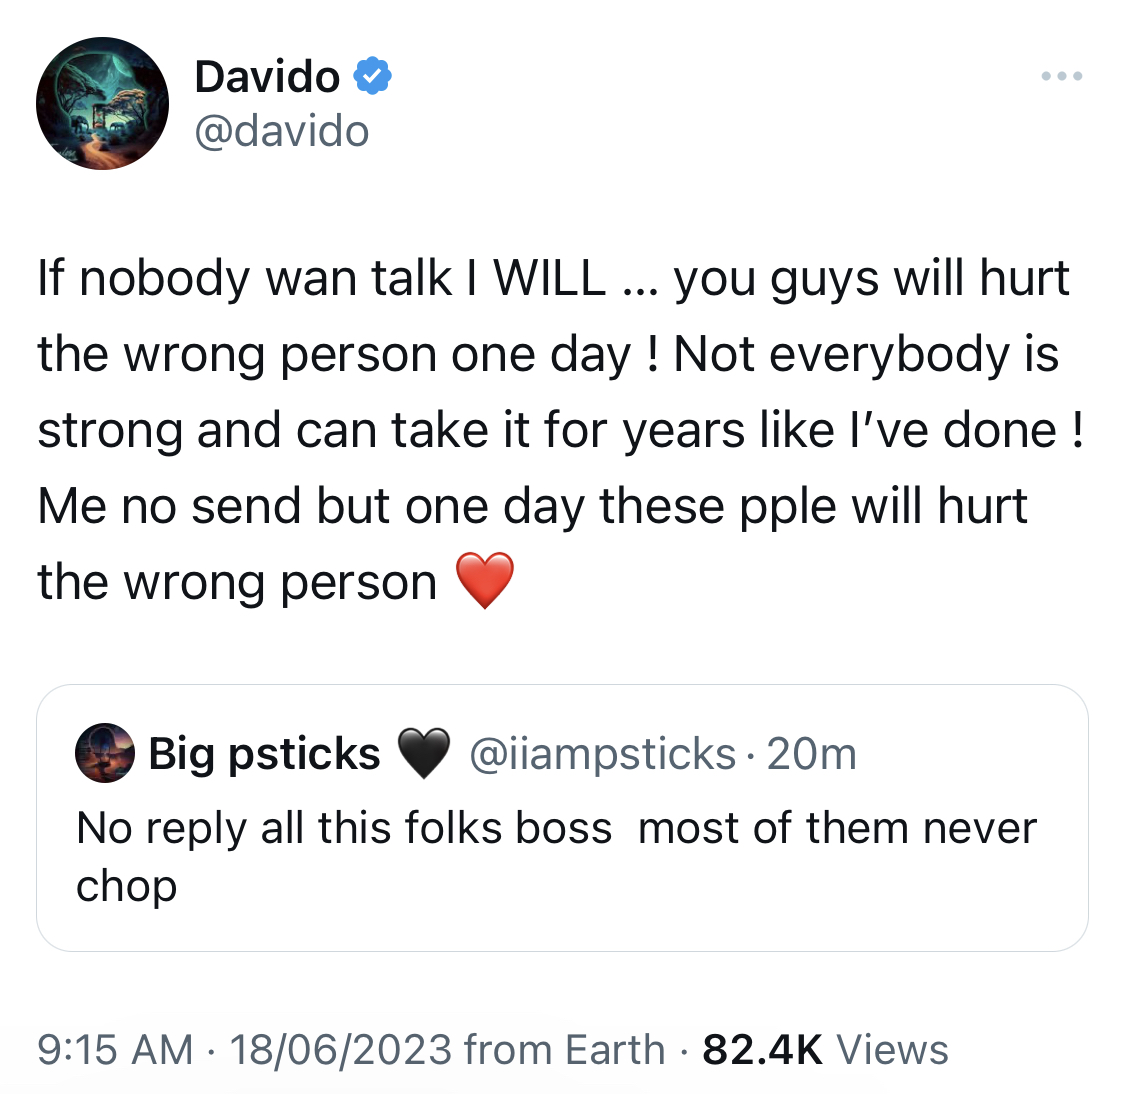 Wizkid doesn’t reply trolls cause he still has a mother - Davido laments